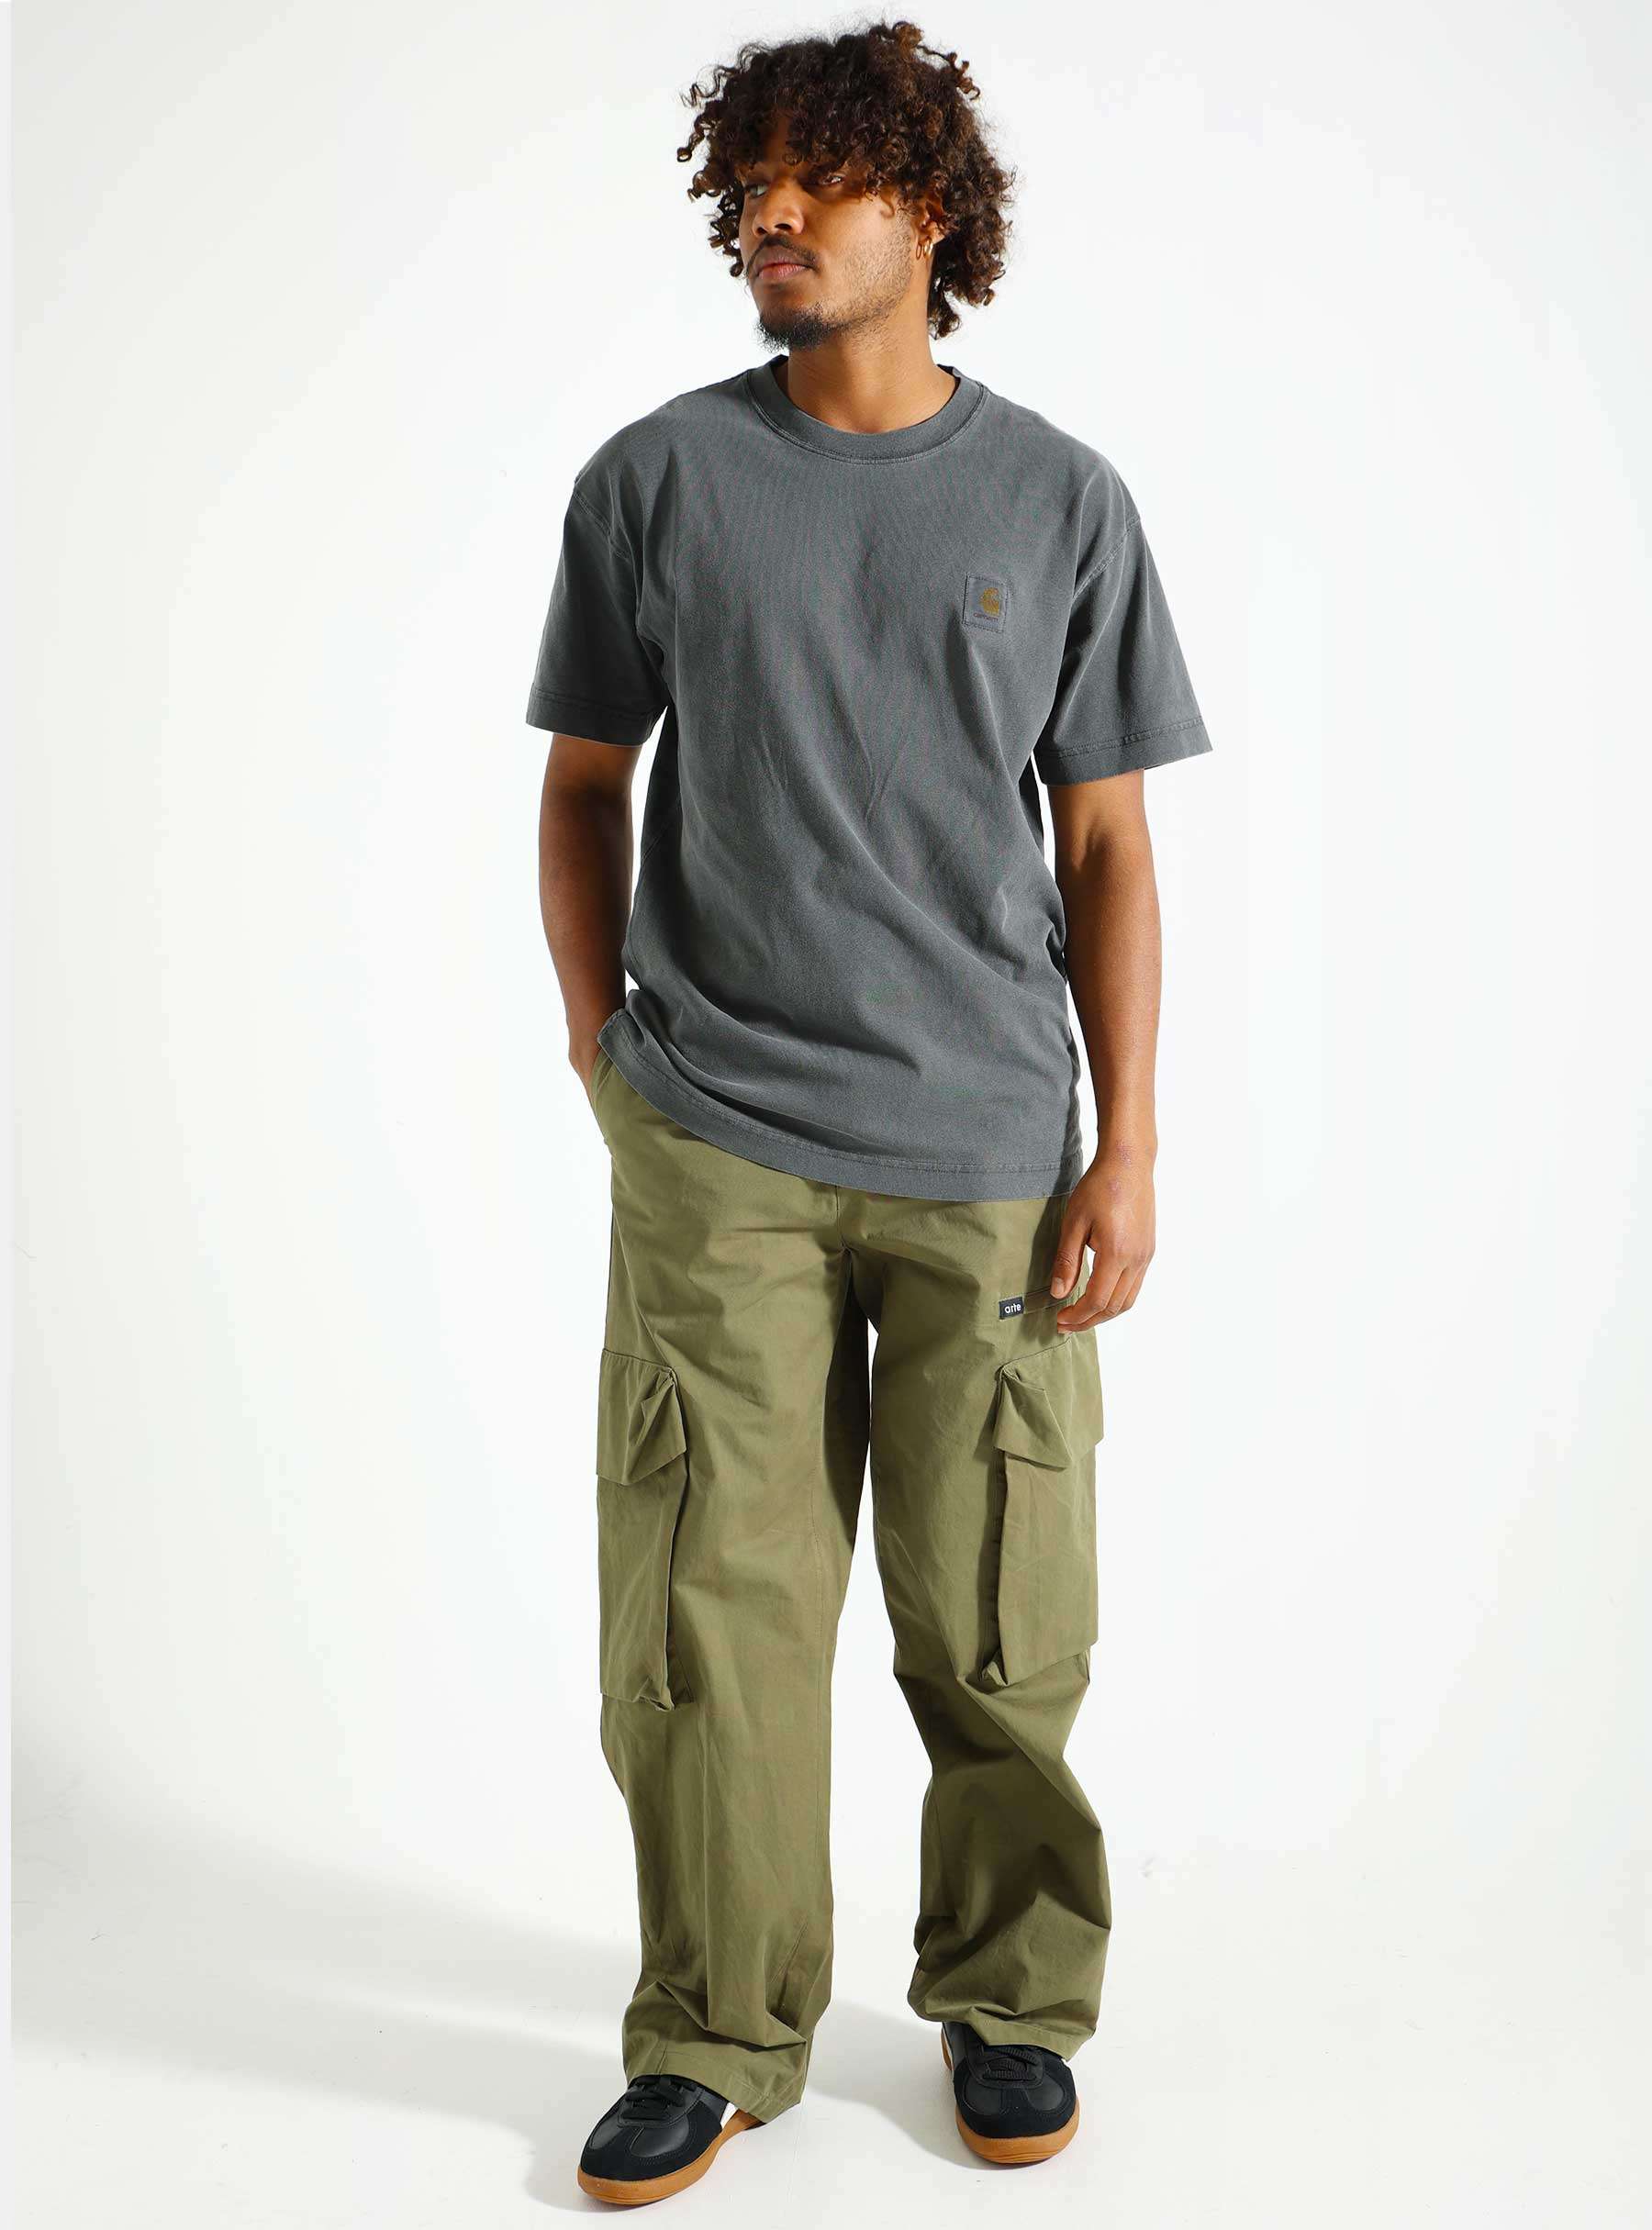 Nelson T-Shirt Charcoal Garment Dyed I029949-98GD